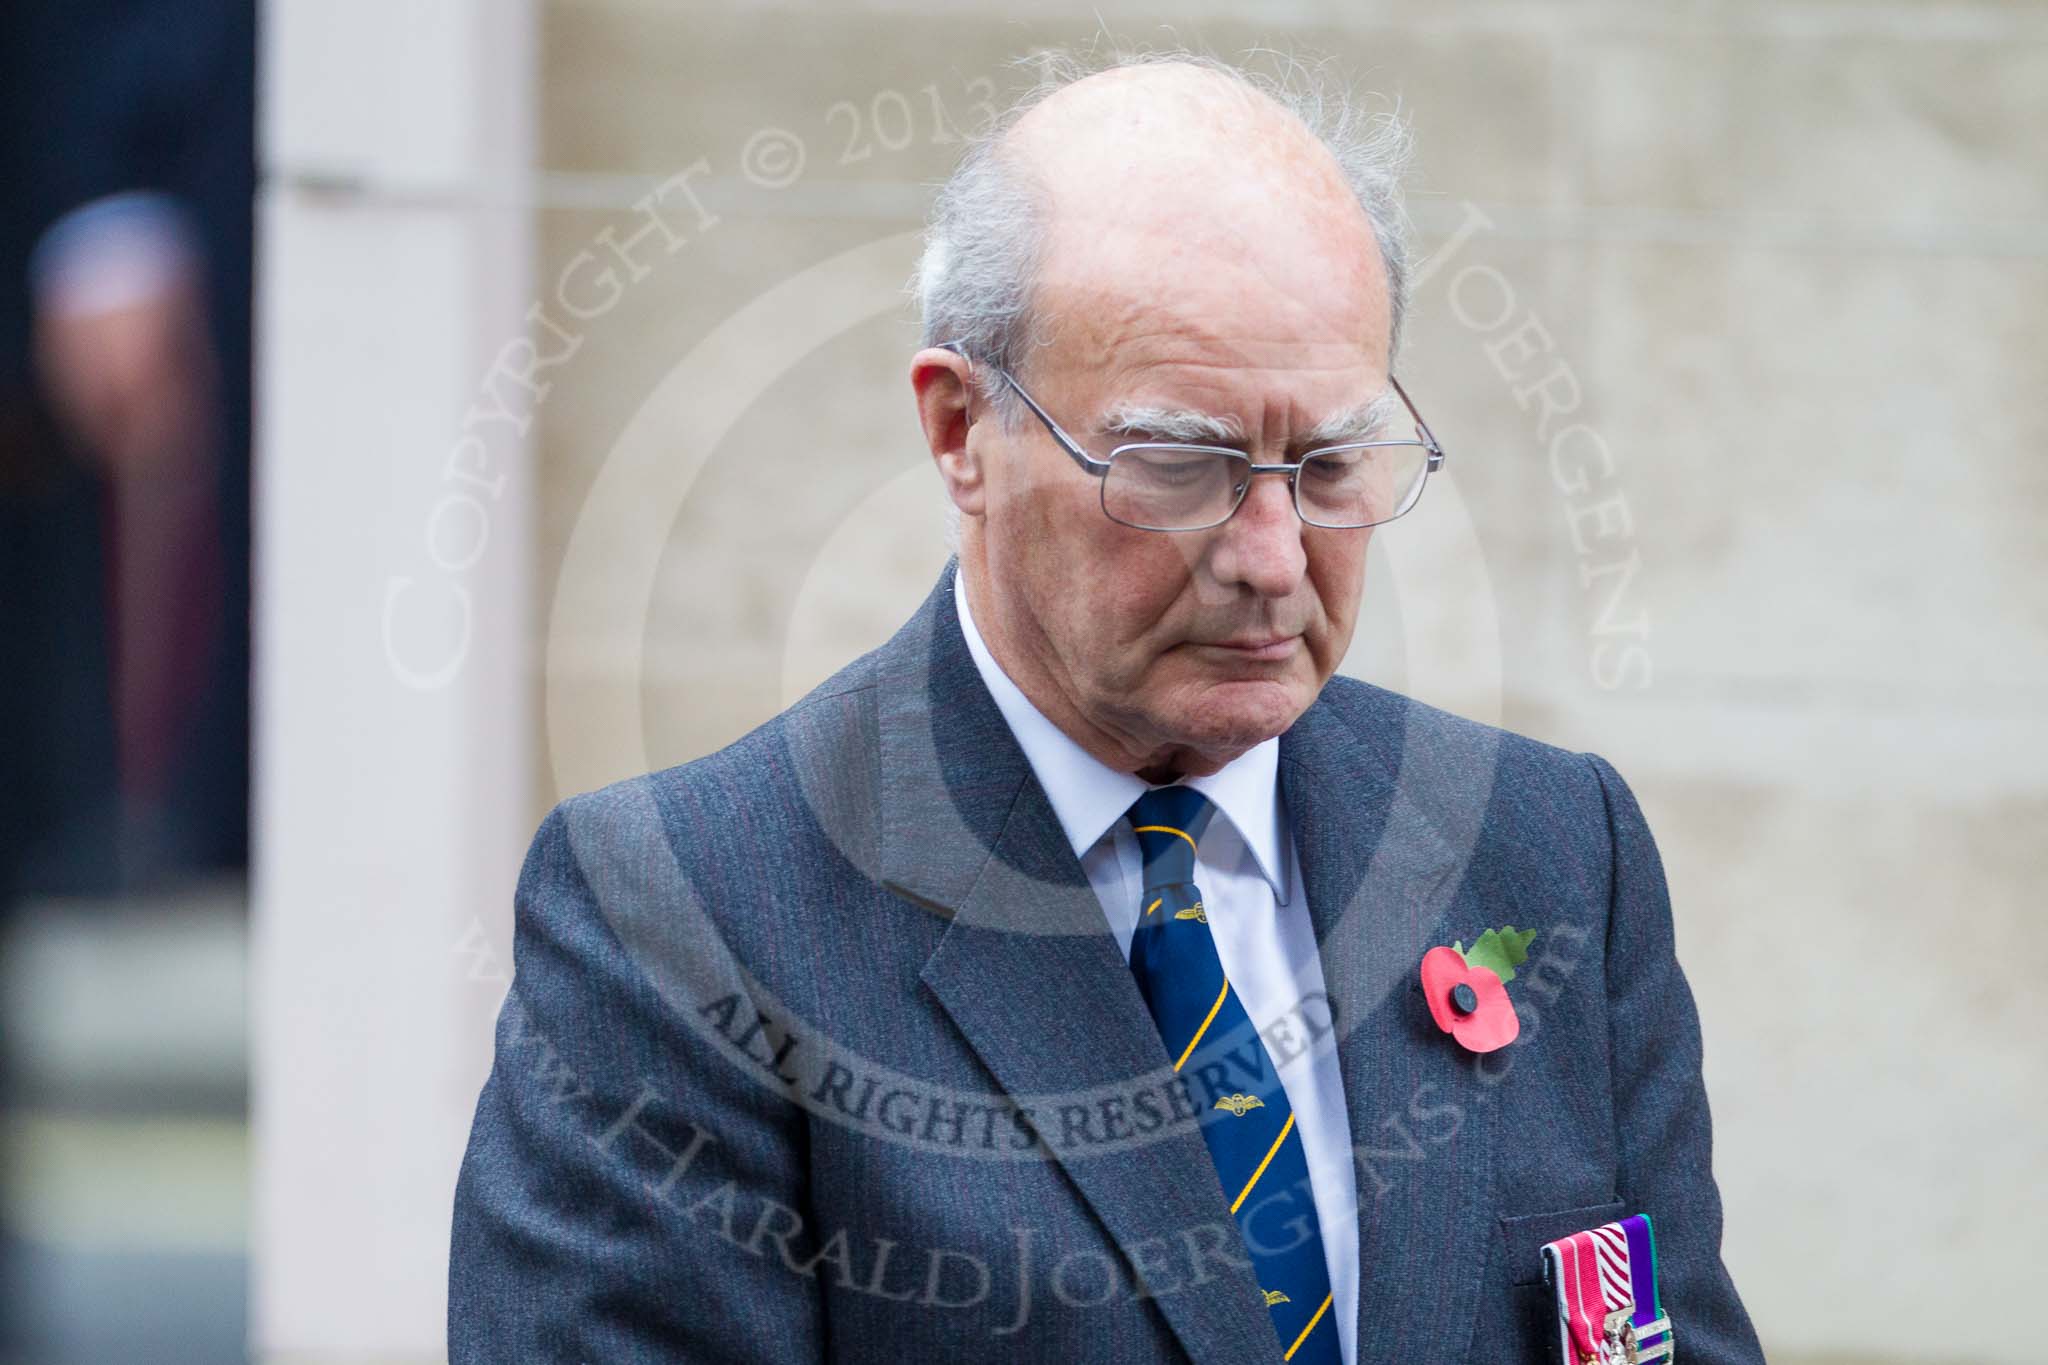 Remembrance Sunday at the Cenotaph 2015: Air Commodore John Lumsden (Air Transport Auxiliary Association) after laying the wreath at the Cenotaph. Image #274, 08 November 2015 11:13 Whitehall, London, UK